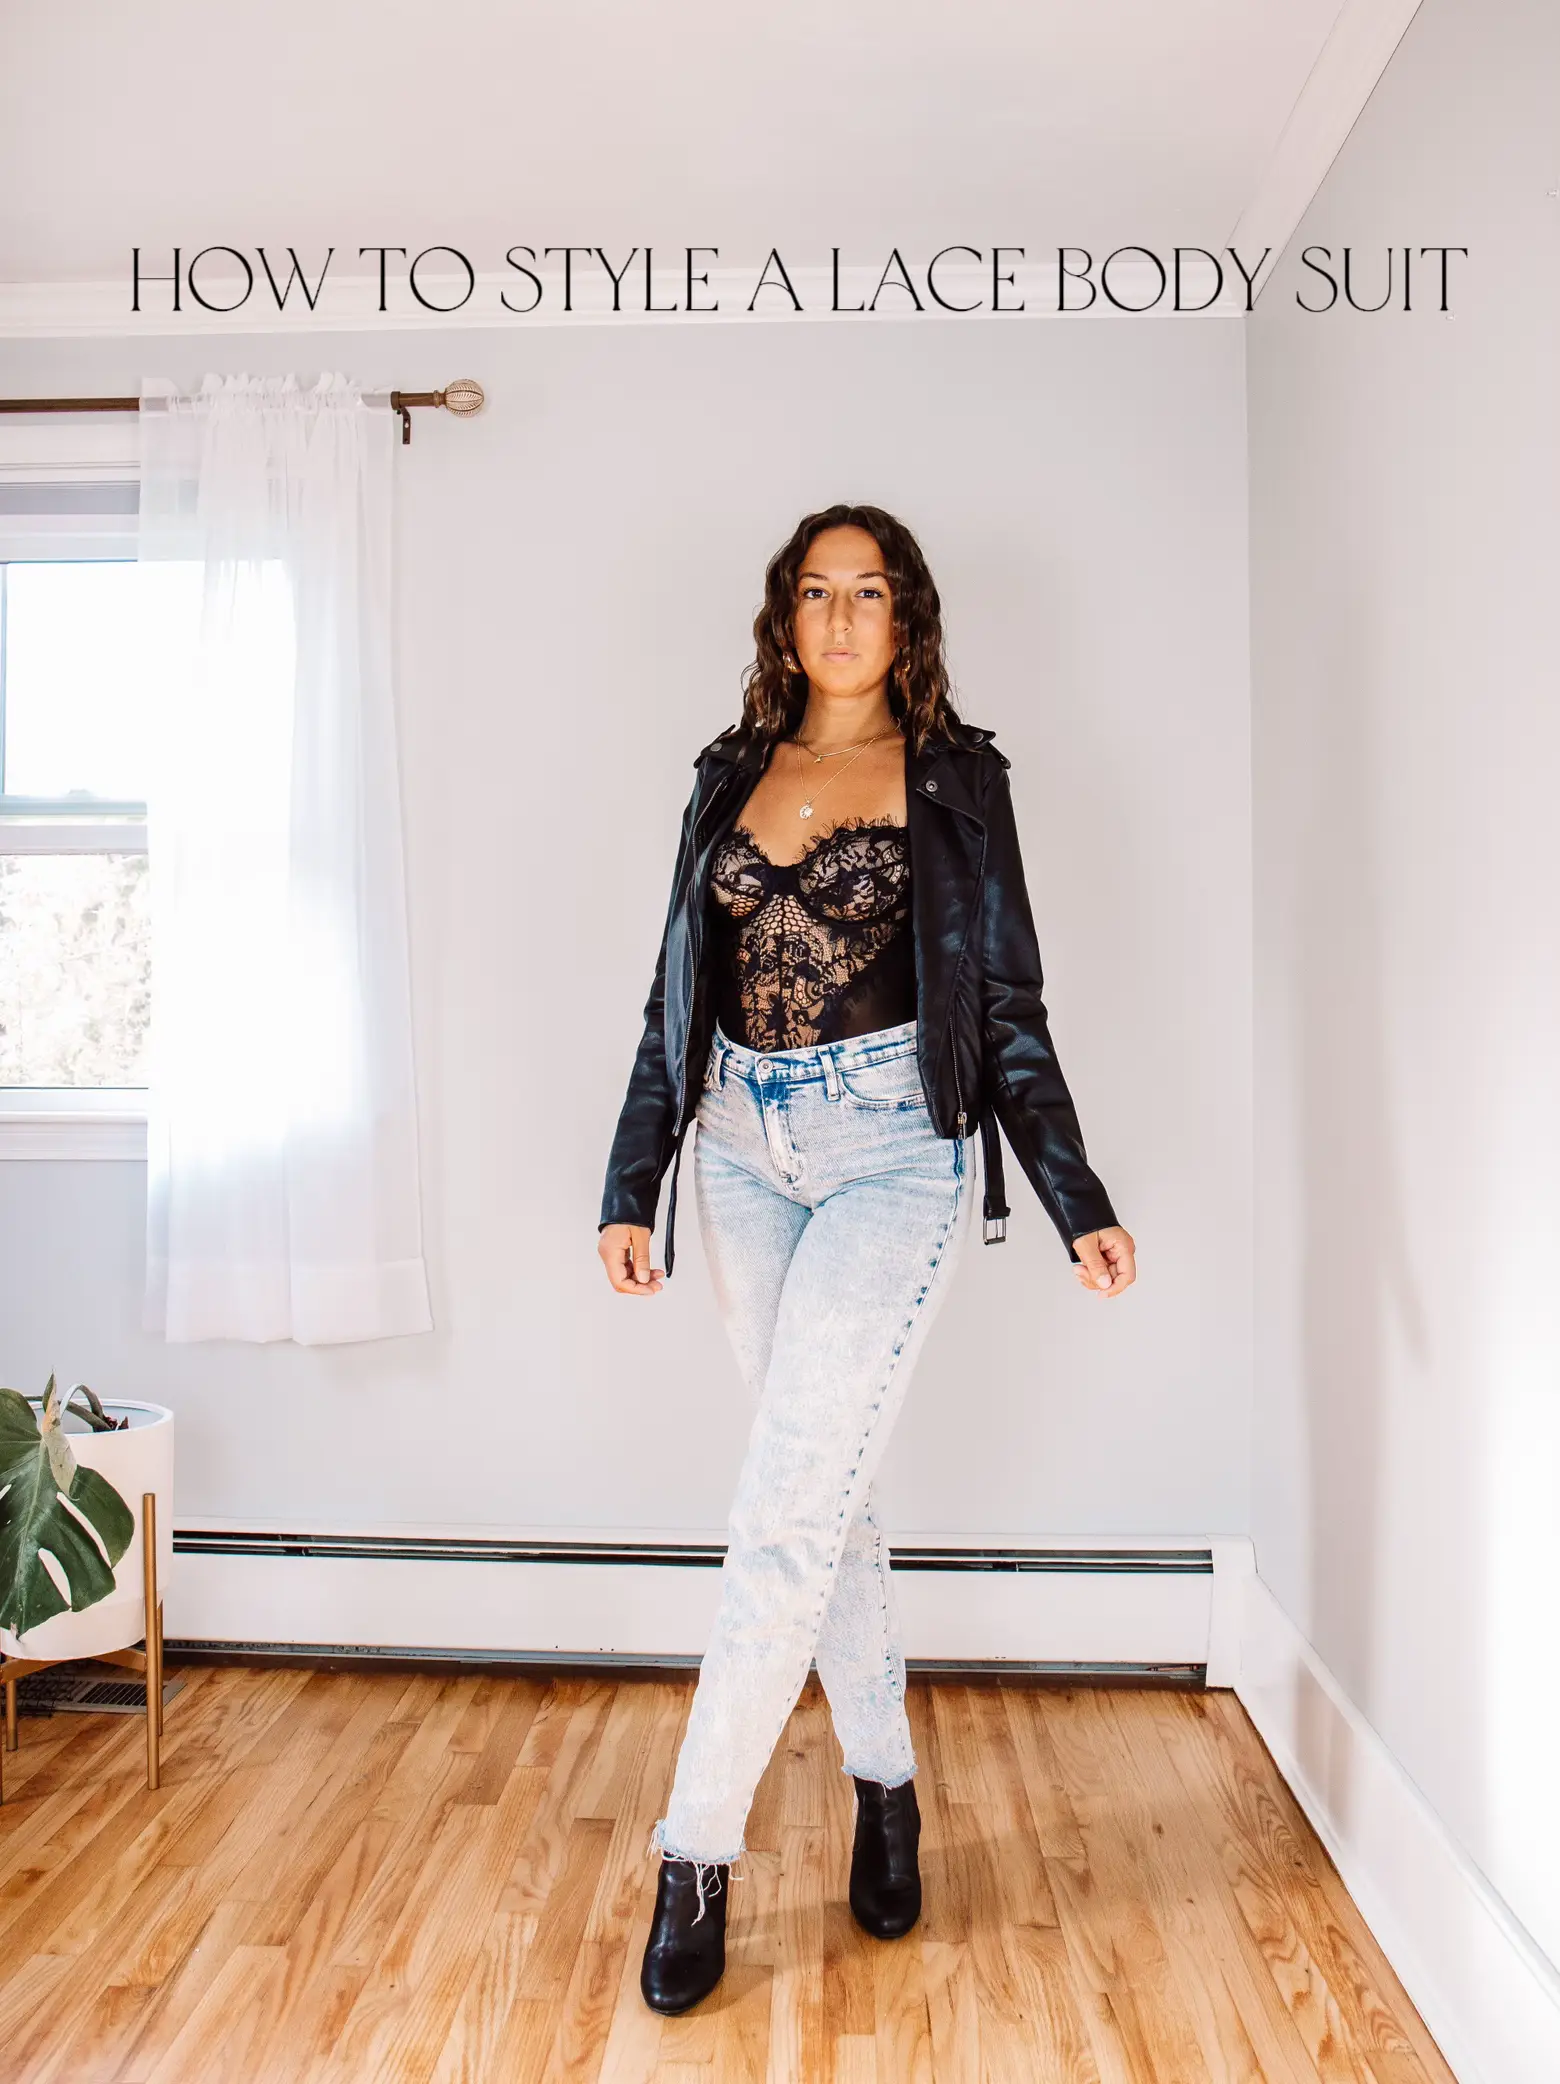 5 WAYS TO STYLE A LACE BODYSUIT